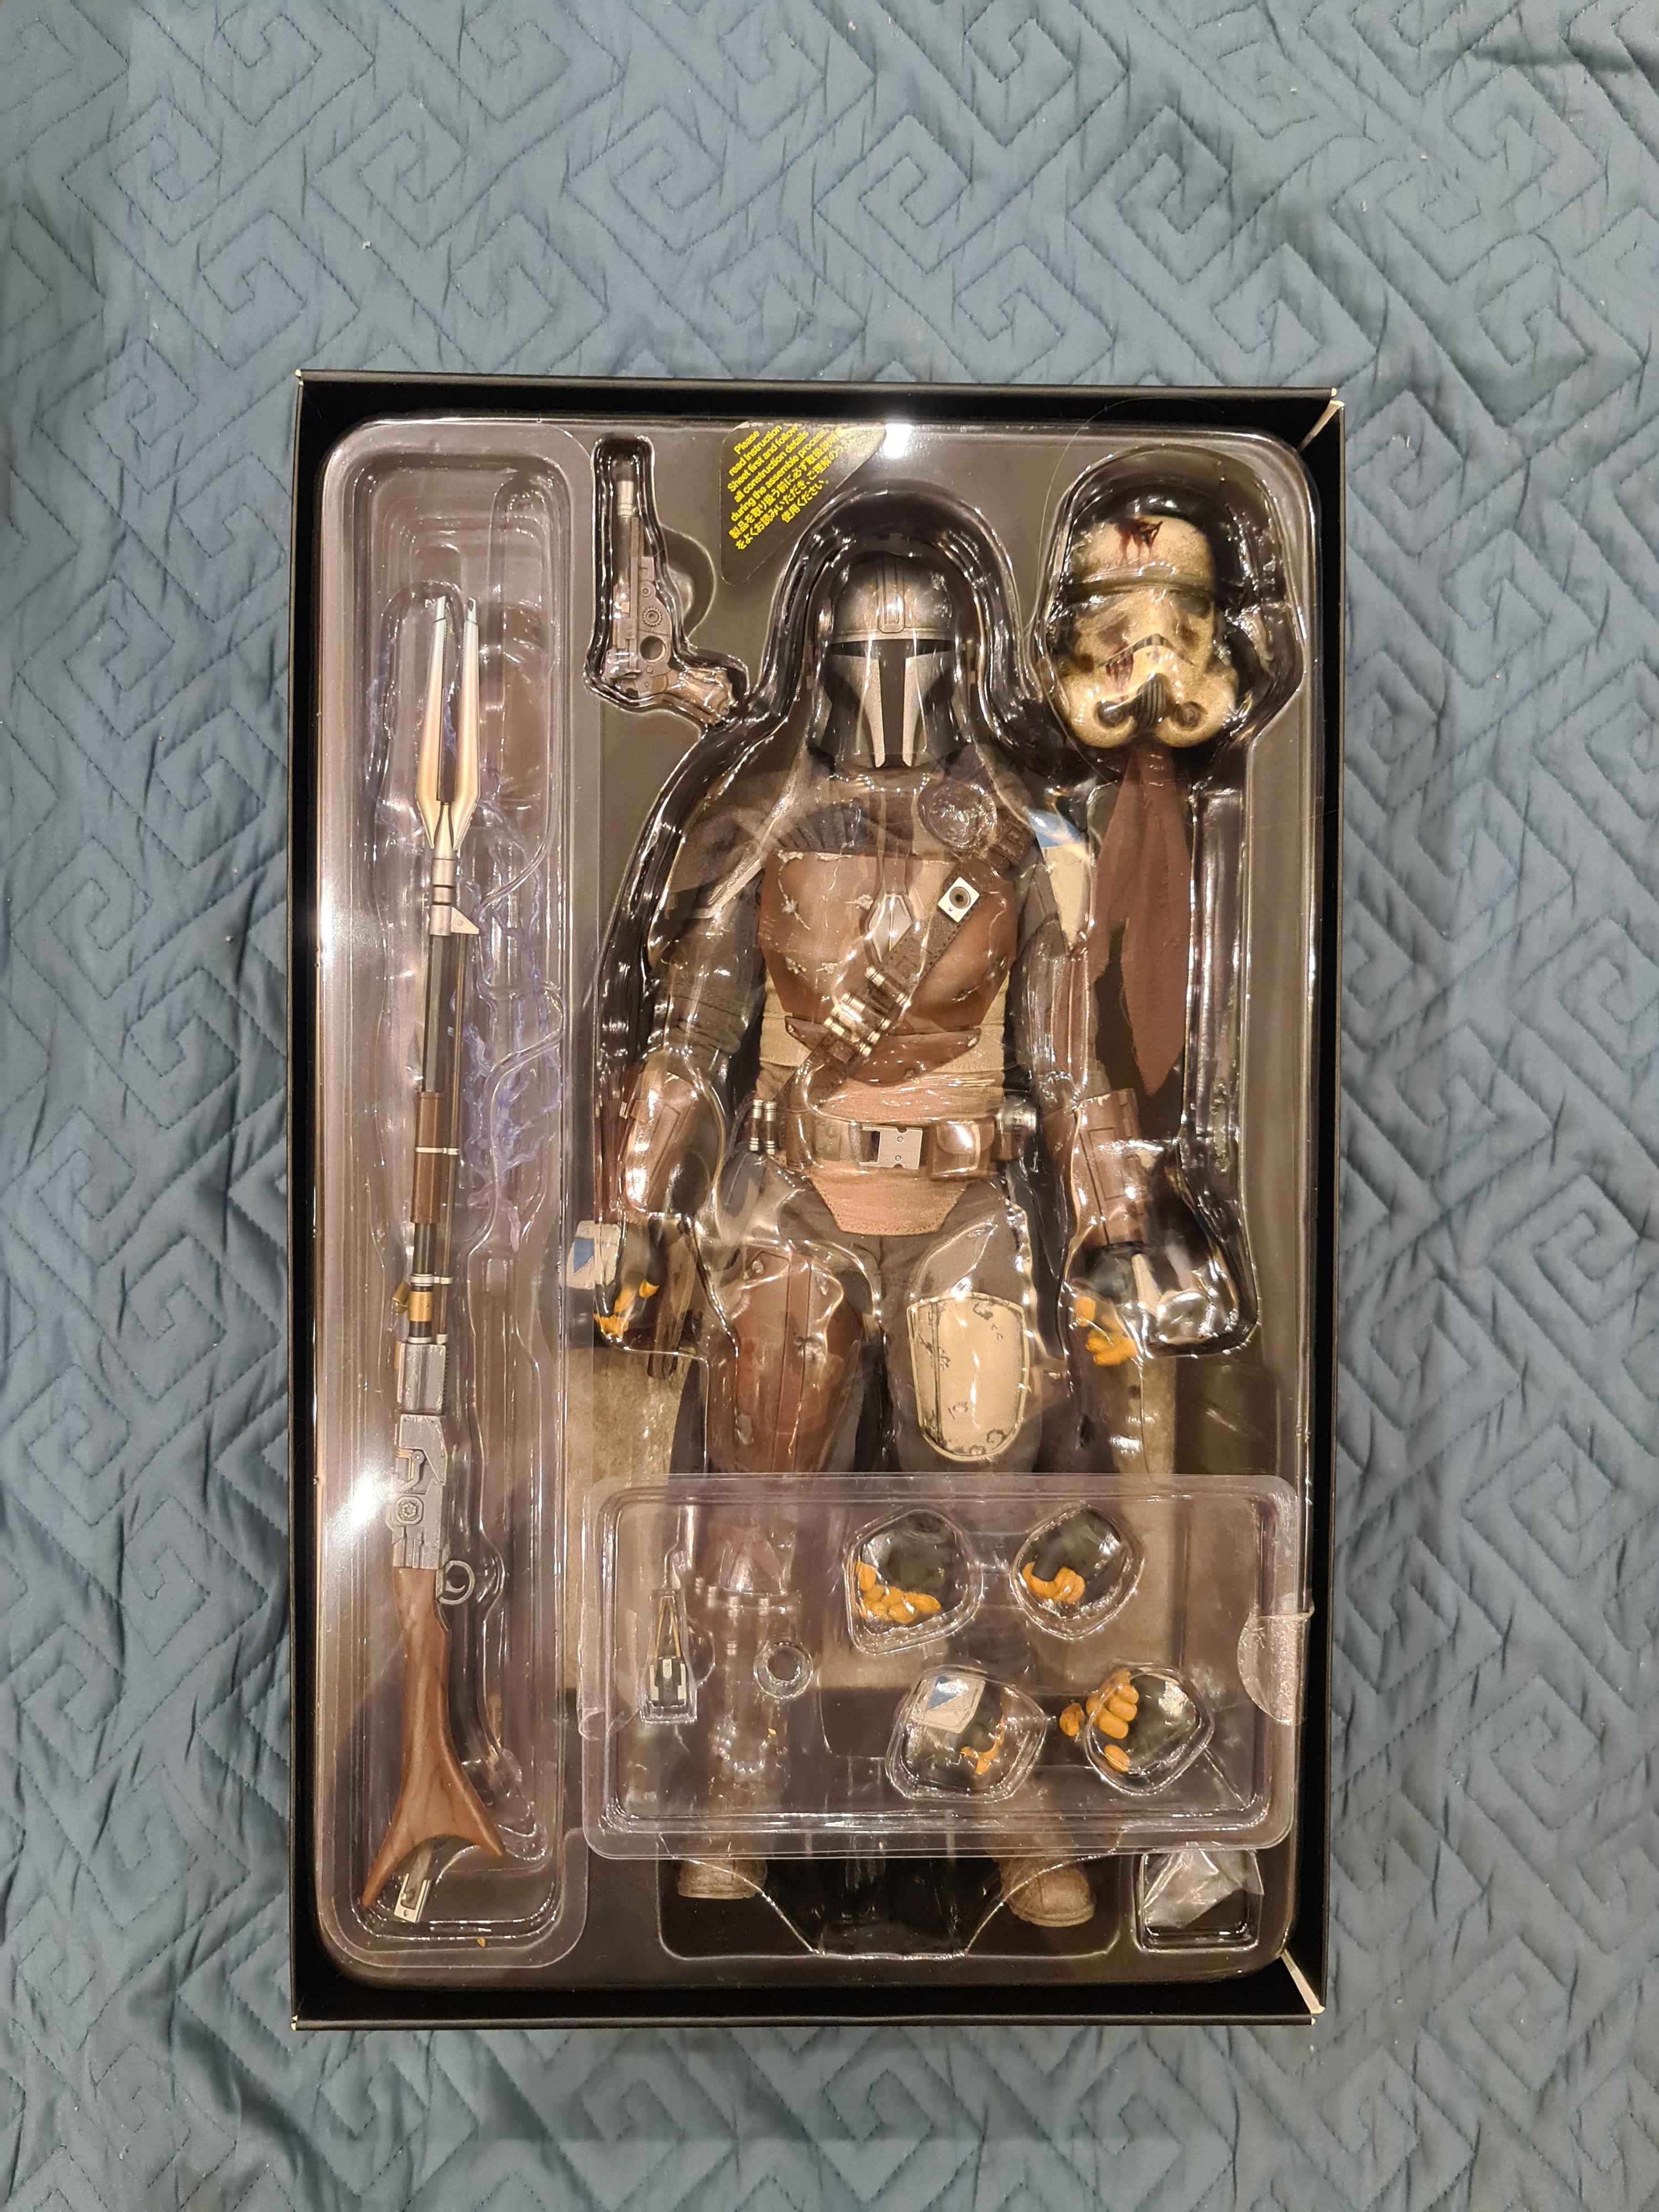 Hot Toys - The Mandalorian - 1:6 Scale Collectible - The Mandalorian - Television Masterpiece Series